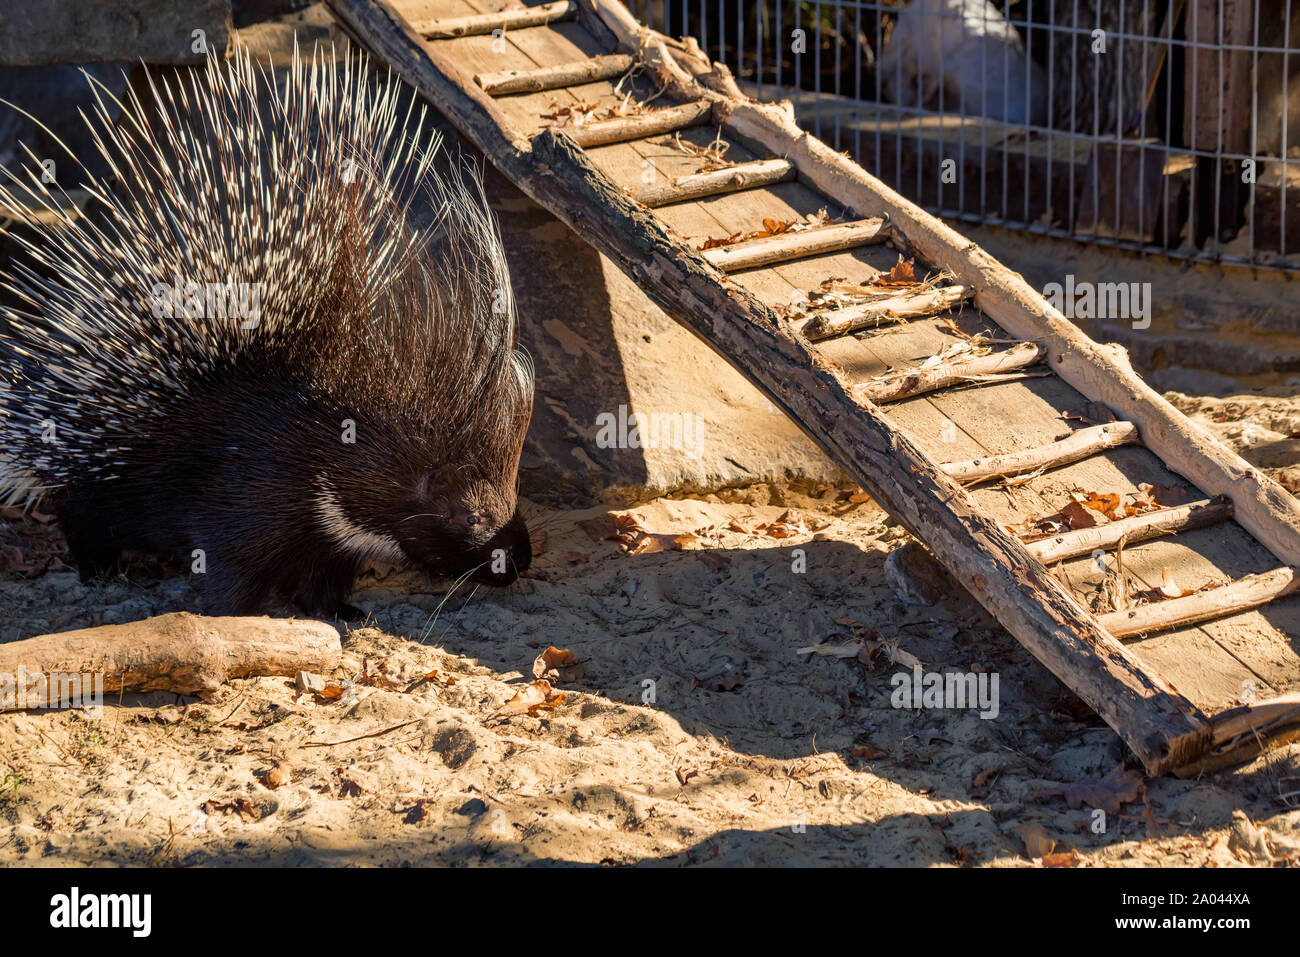 Cute Crested porcupine or Hystrix indica looks for food on ground in captivity Stock Photo